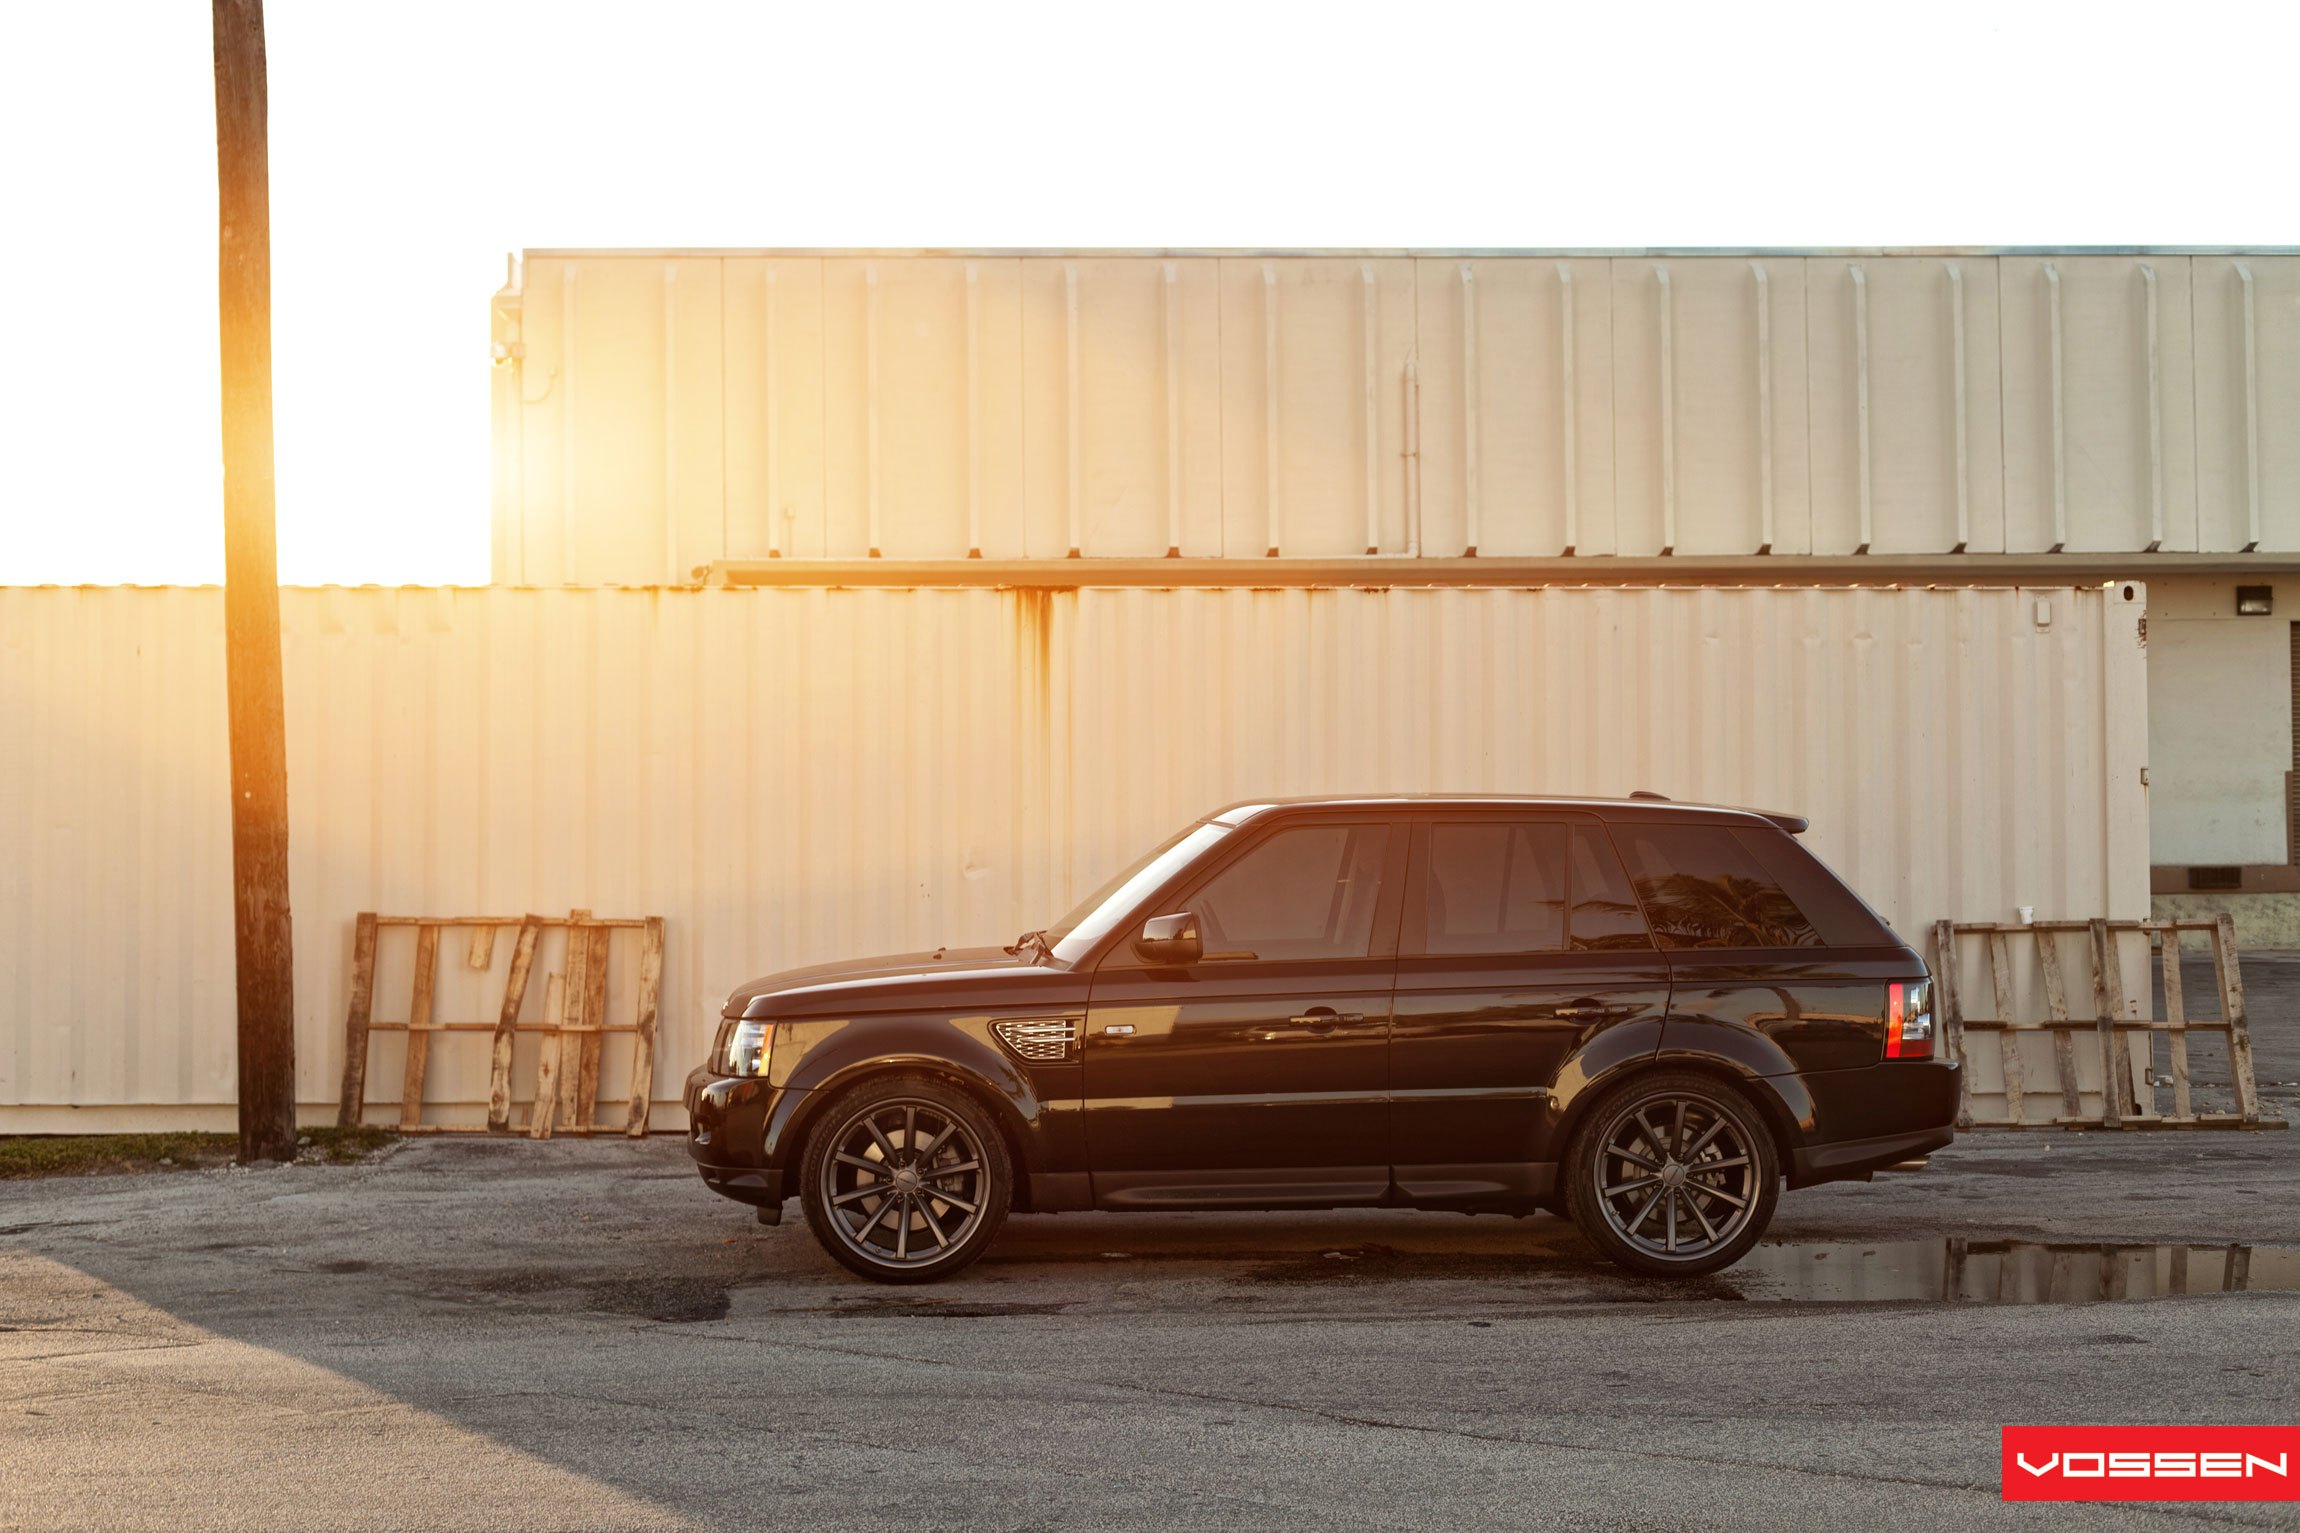 Black Land Rover Sport with Custom Bodyside Moldings - Photo by Vossen